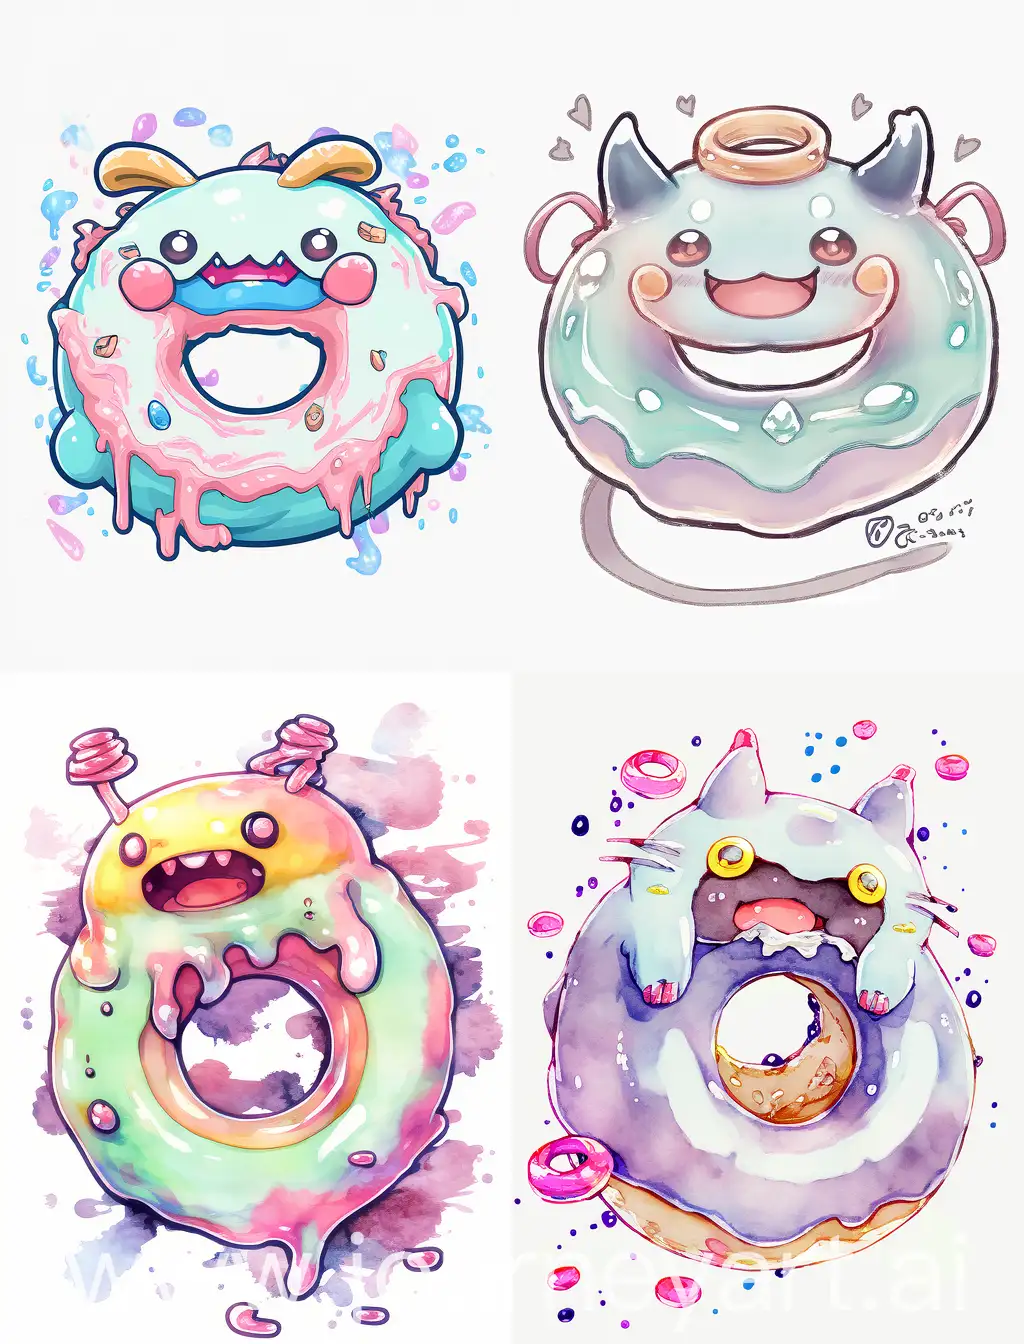 Adorable-DonutShaped-Slime-Monster-with-Floppy-Ears-Watercolor-Anime-Art